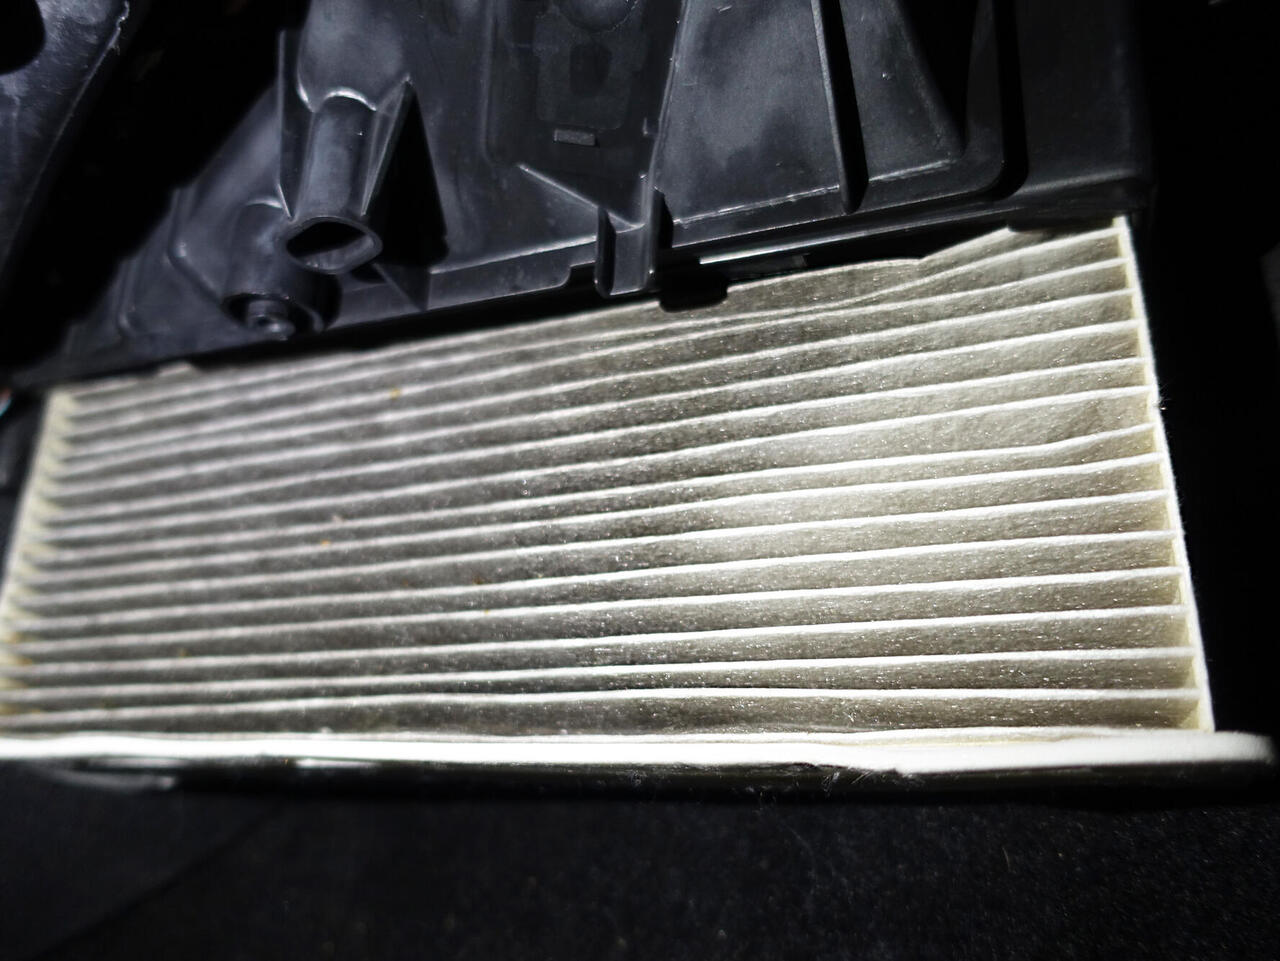 White cabin air filter pulled out of holder in the foot area of the car